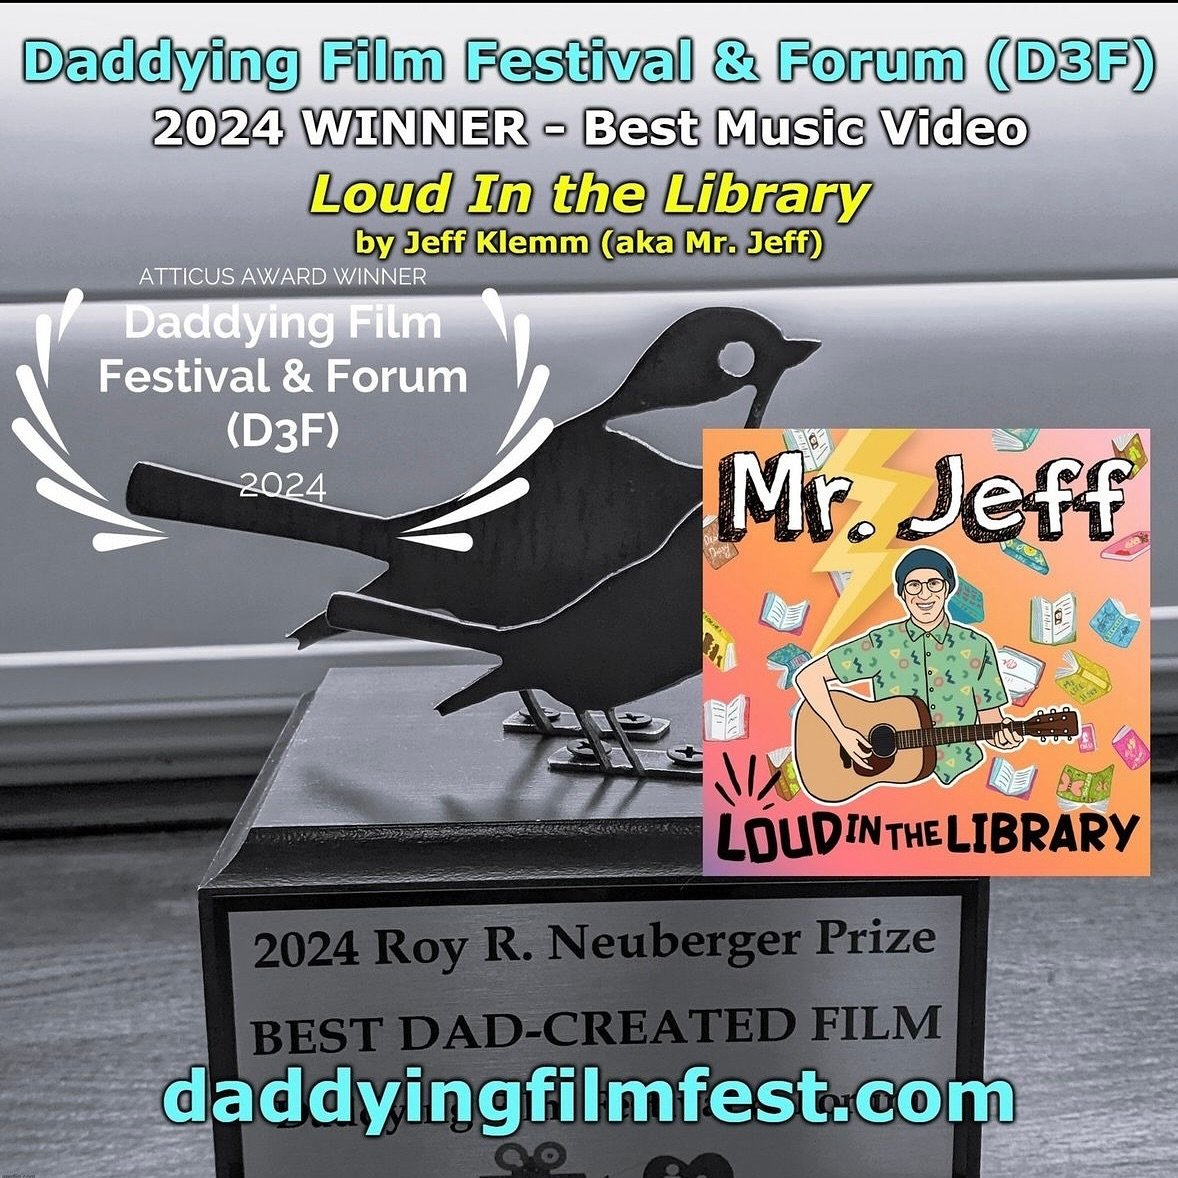 So honored to have won the award for &ldquo;Best Music Video&rdquo; at the Daddying Film Festival &amp; Forum for our &ldquo;Loud In the Library&rdquo; music video! Thanks so much to everyone who&rsquo;s supported this project thus far! Sooo cool!!! 